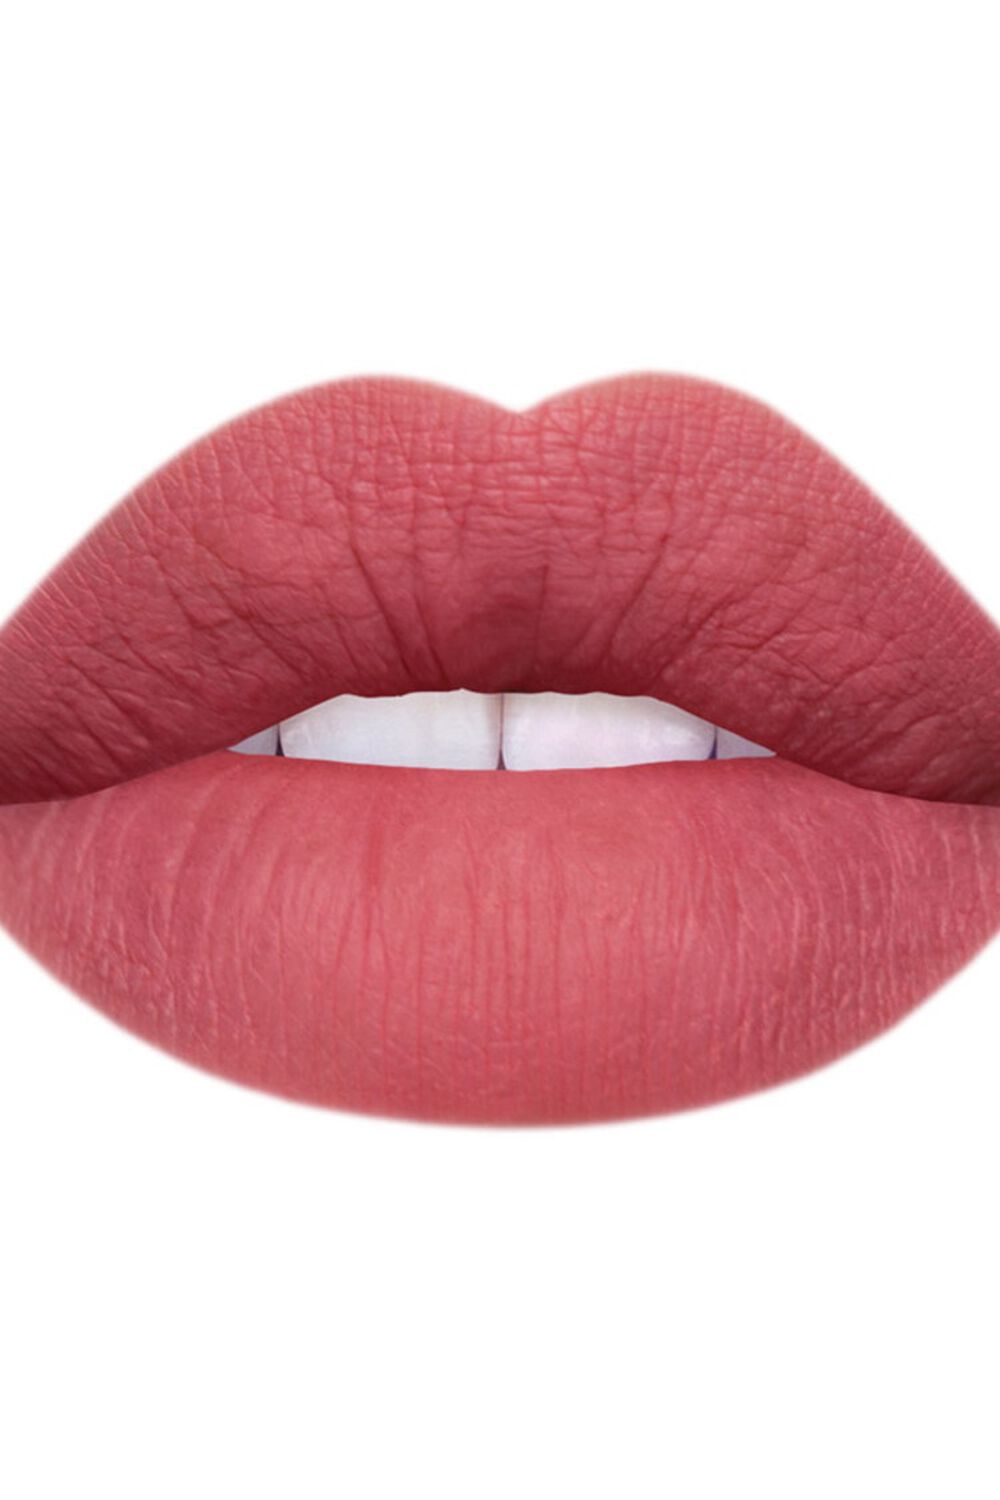 Lime Crime - 50% off RED LIPS SALE! Matte, metallic